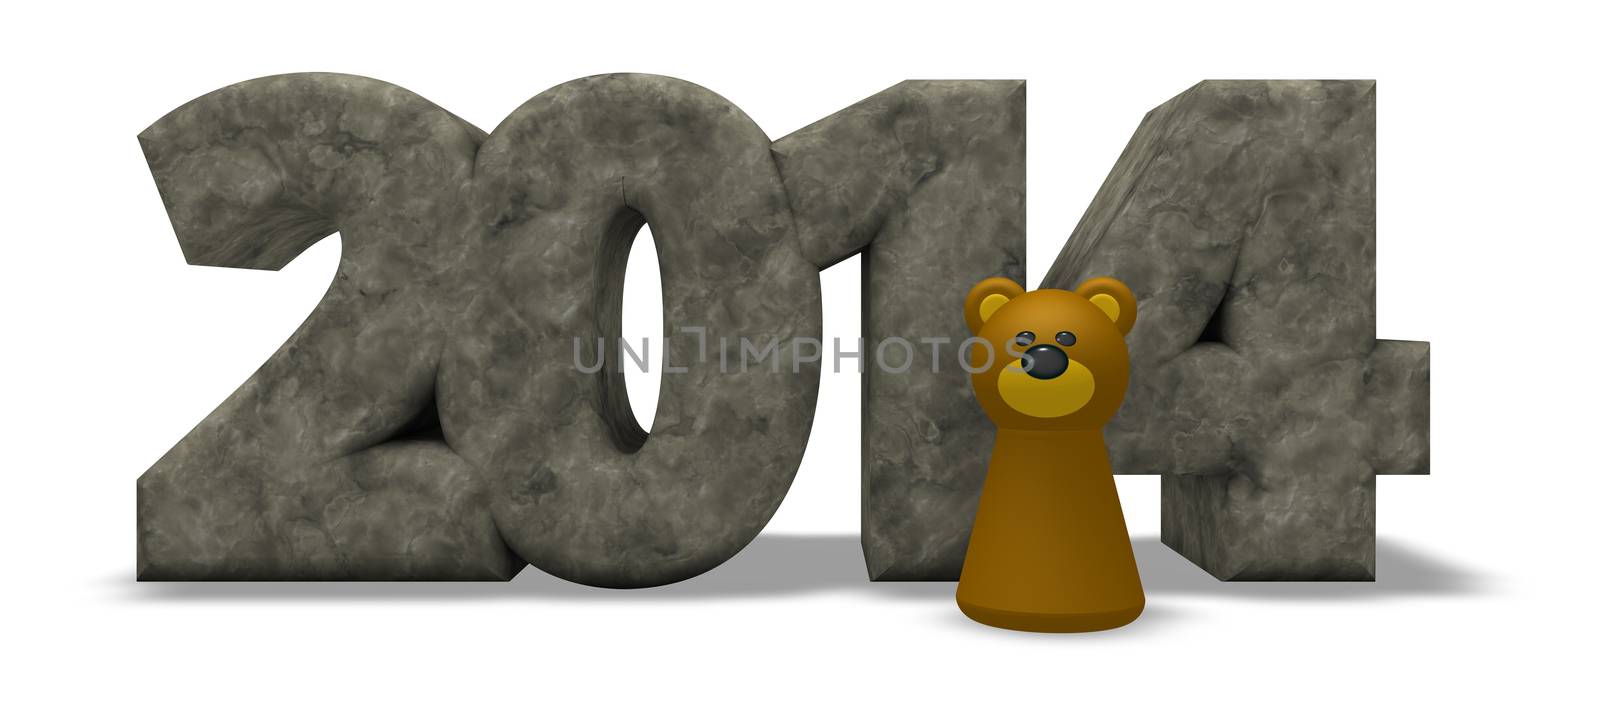 stone year number 2014 and bear - 3d illustration